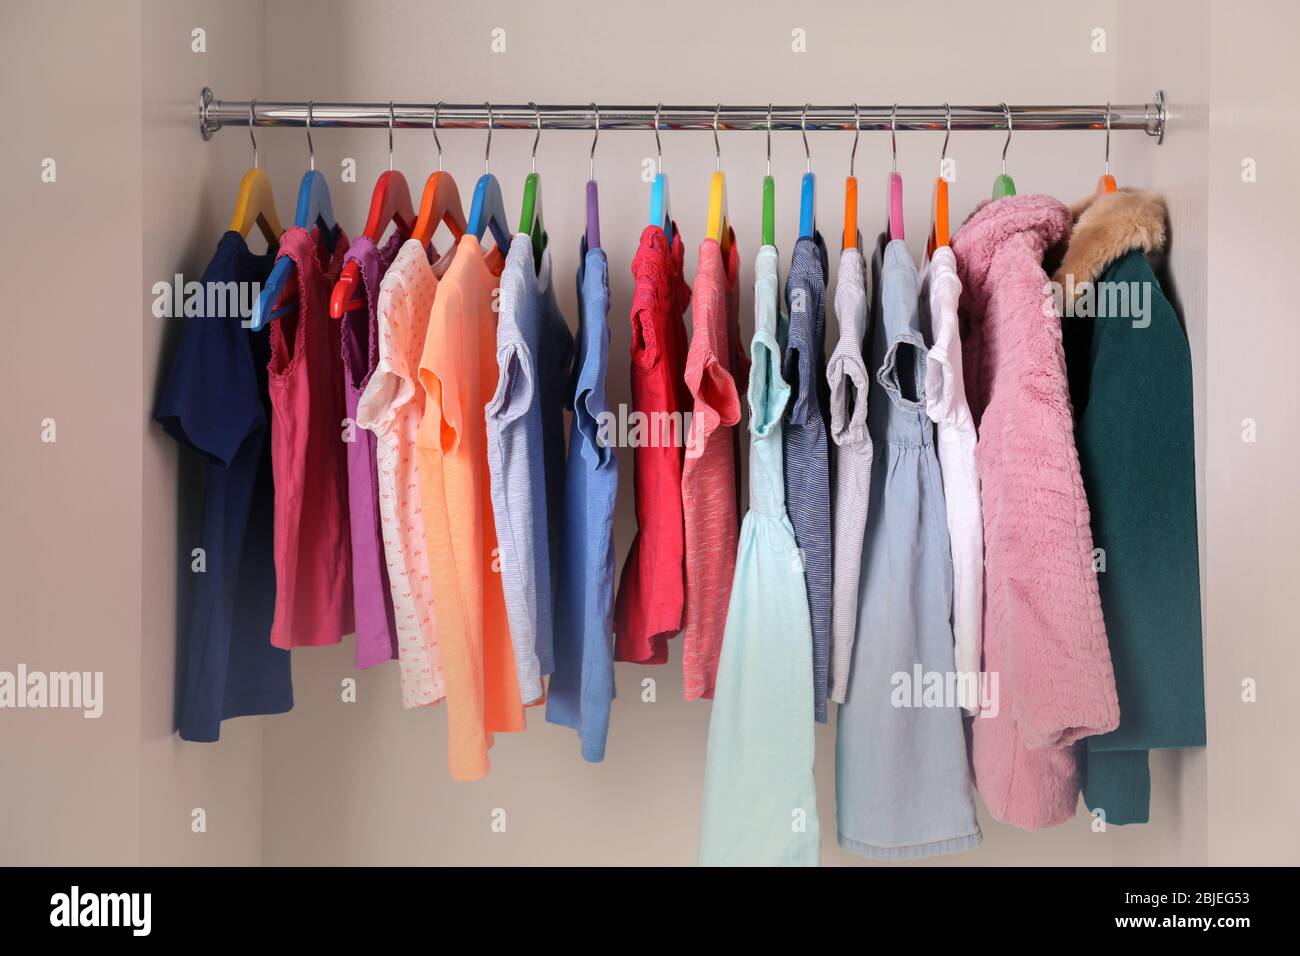 https://c8.alamy.com/comp/2BJEG53/colourful-clothes-on-hangers-in-wardrobe-2BJEG53.jpg